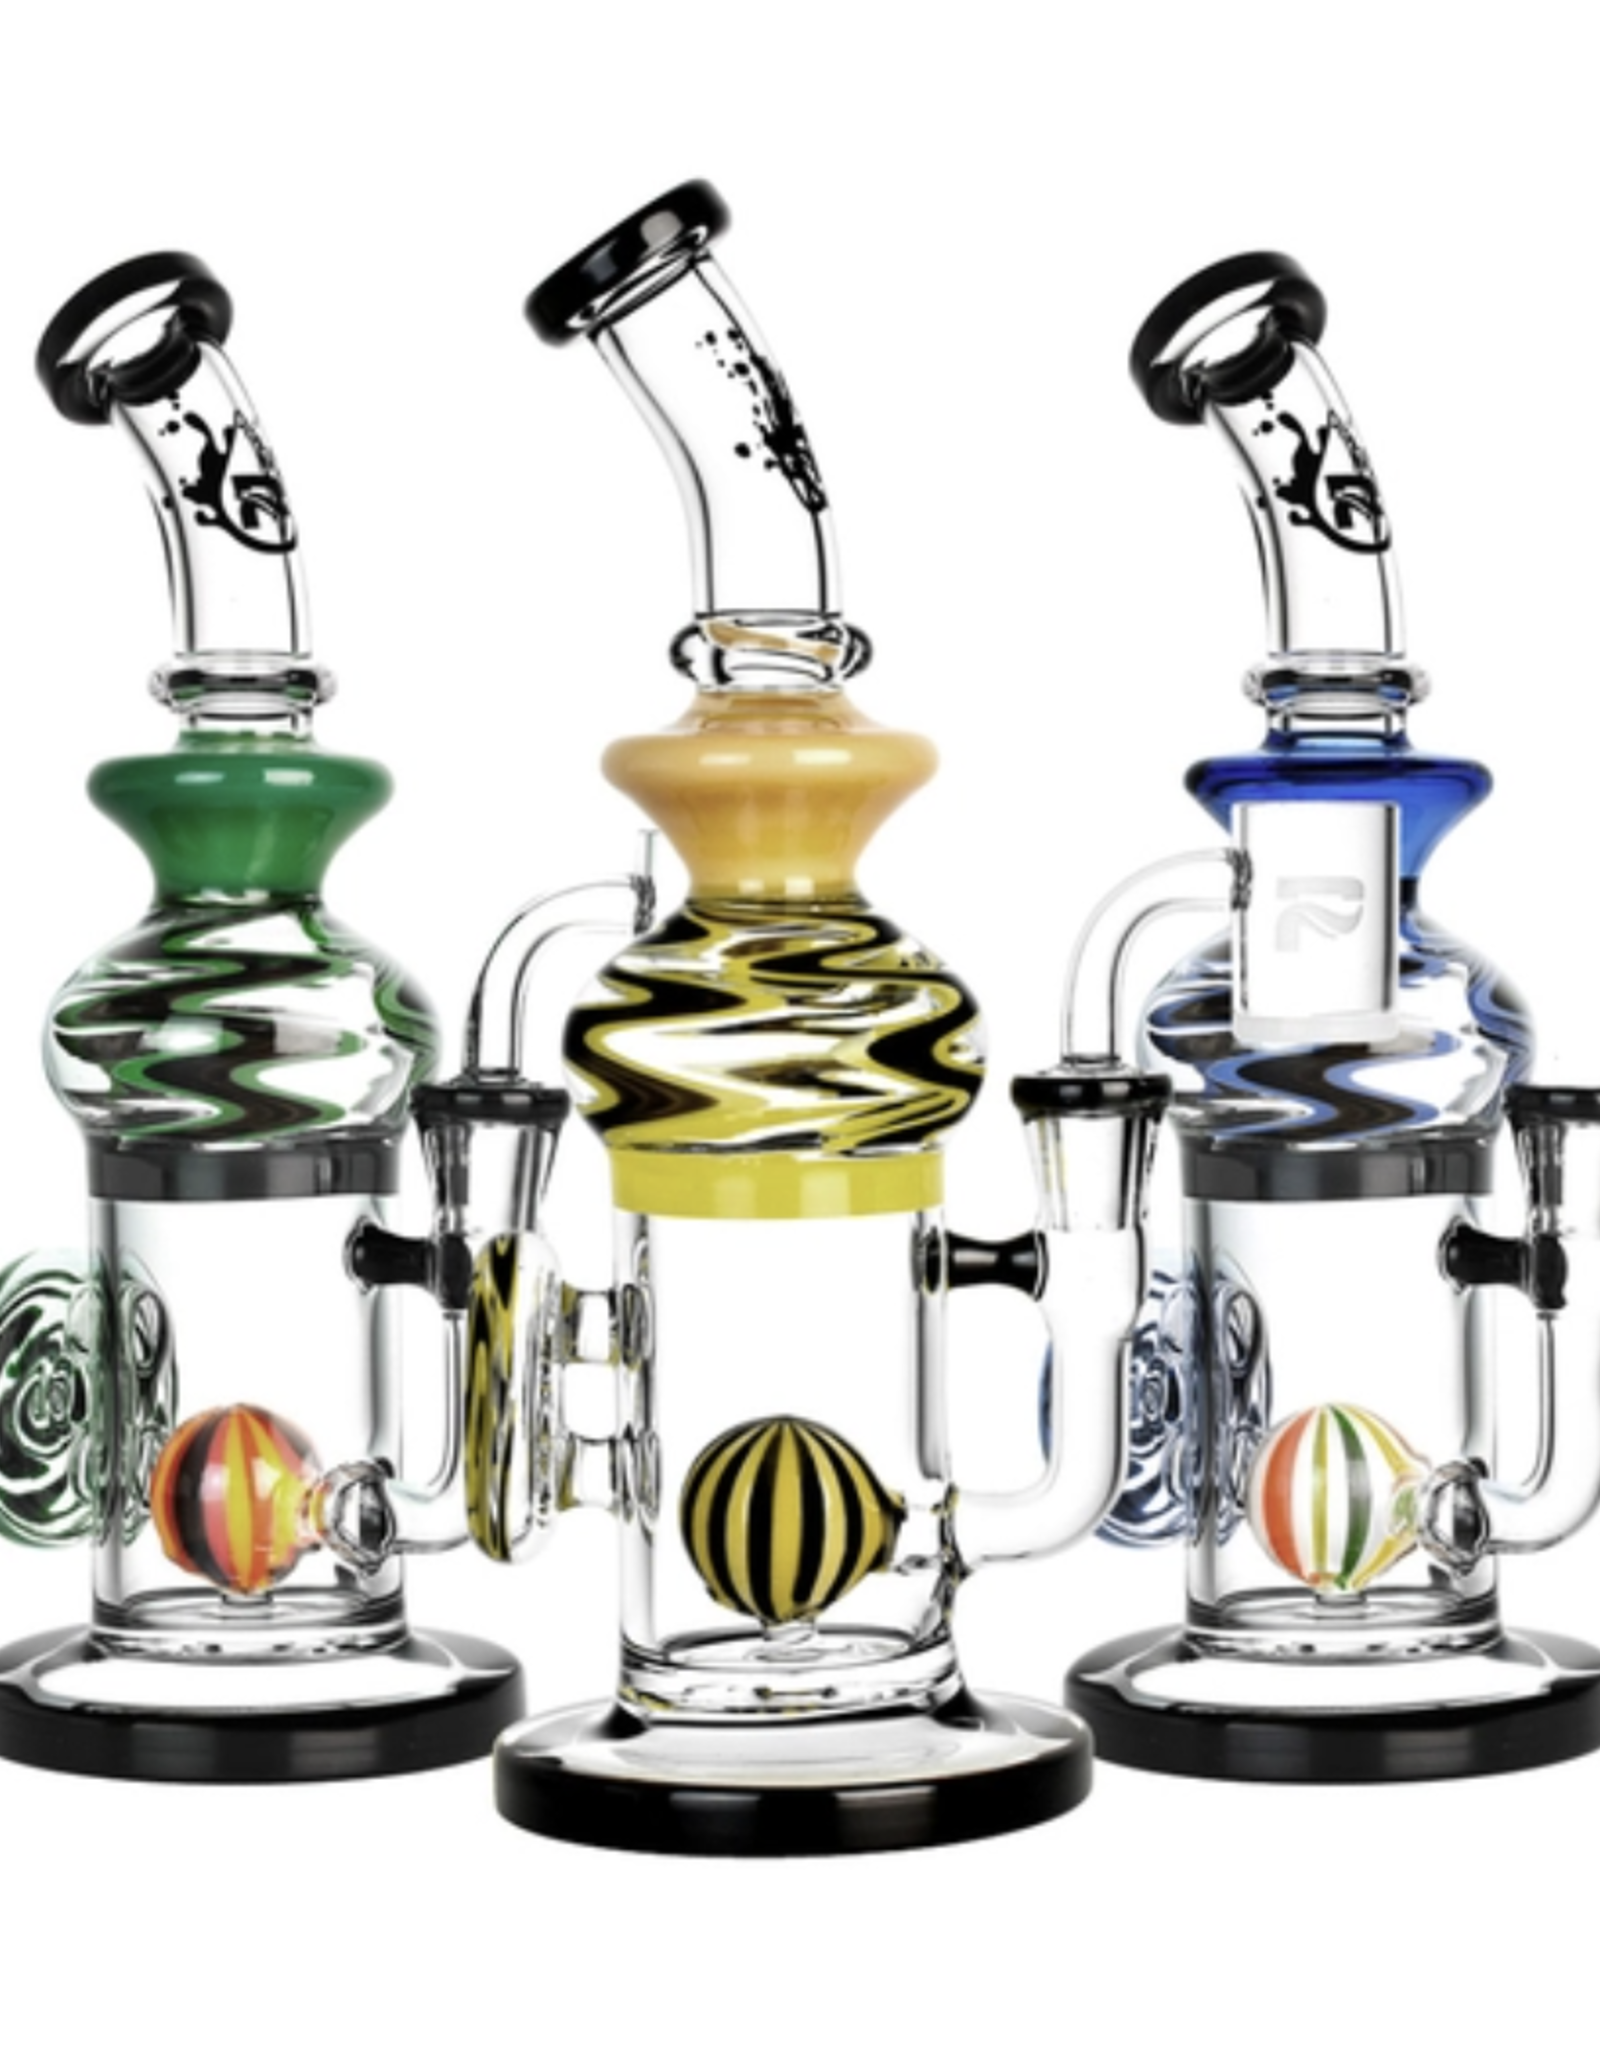 Pulsar 9.5" High Contrast Ball Perc Rig with Reversal & Colour Accents